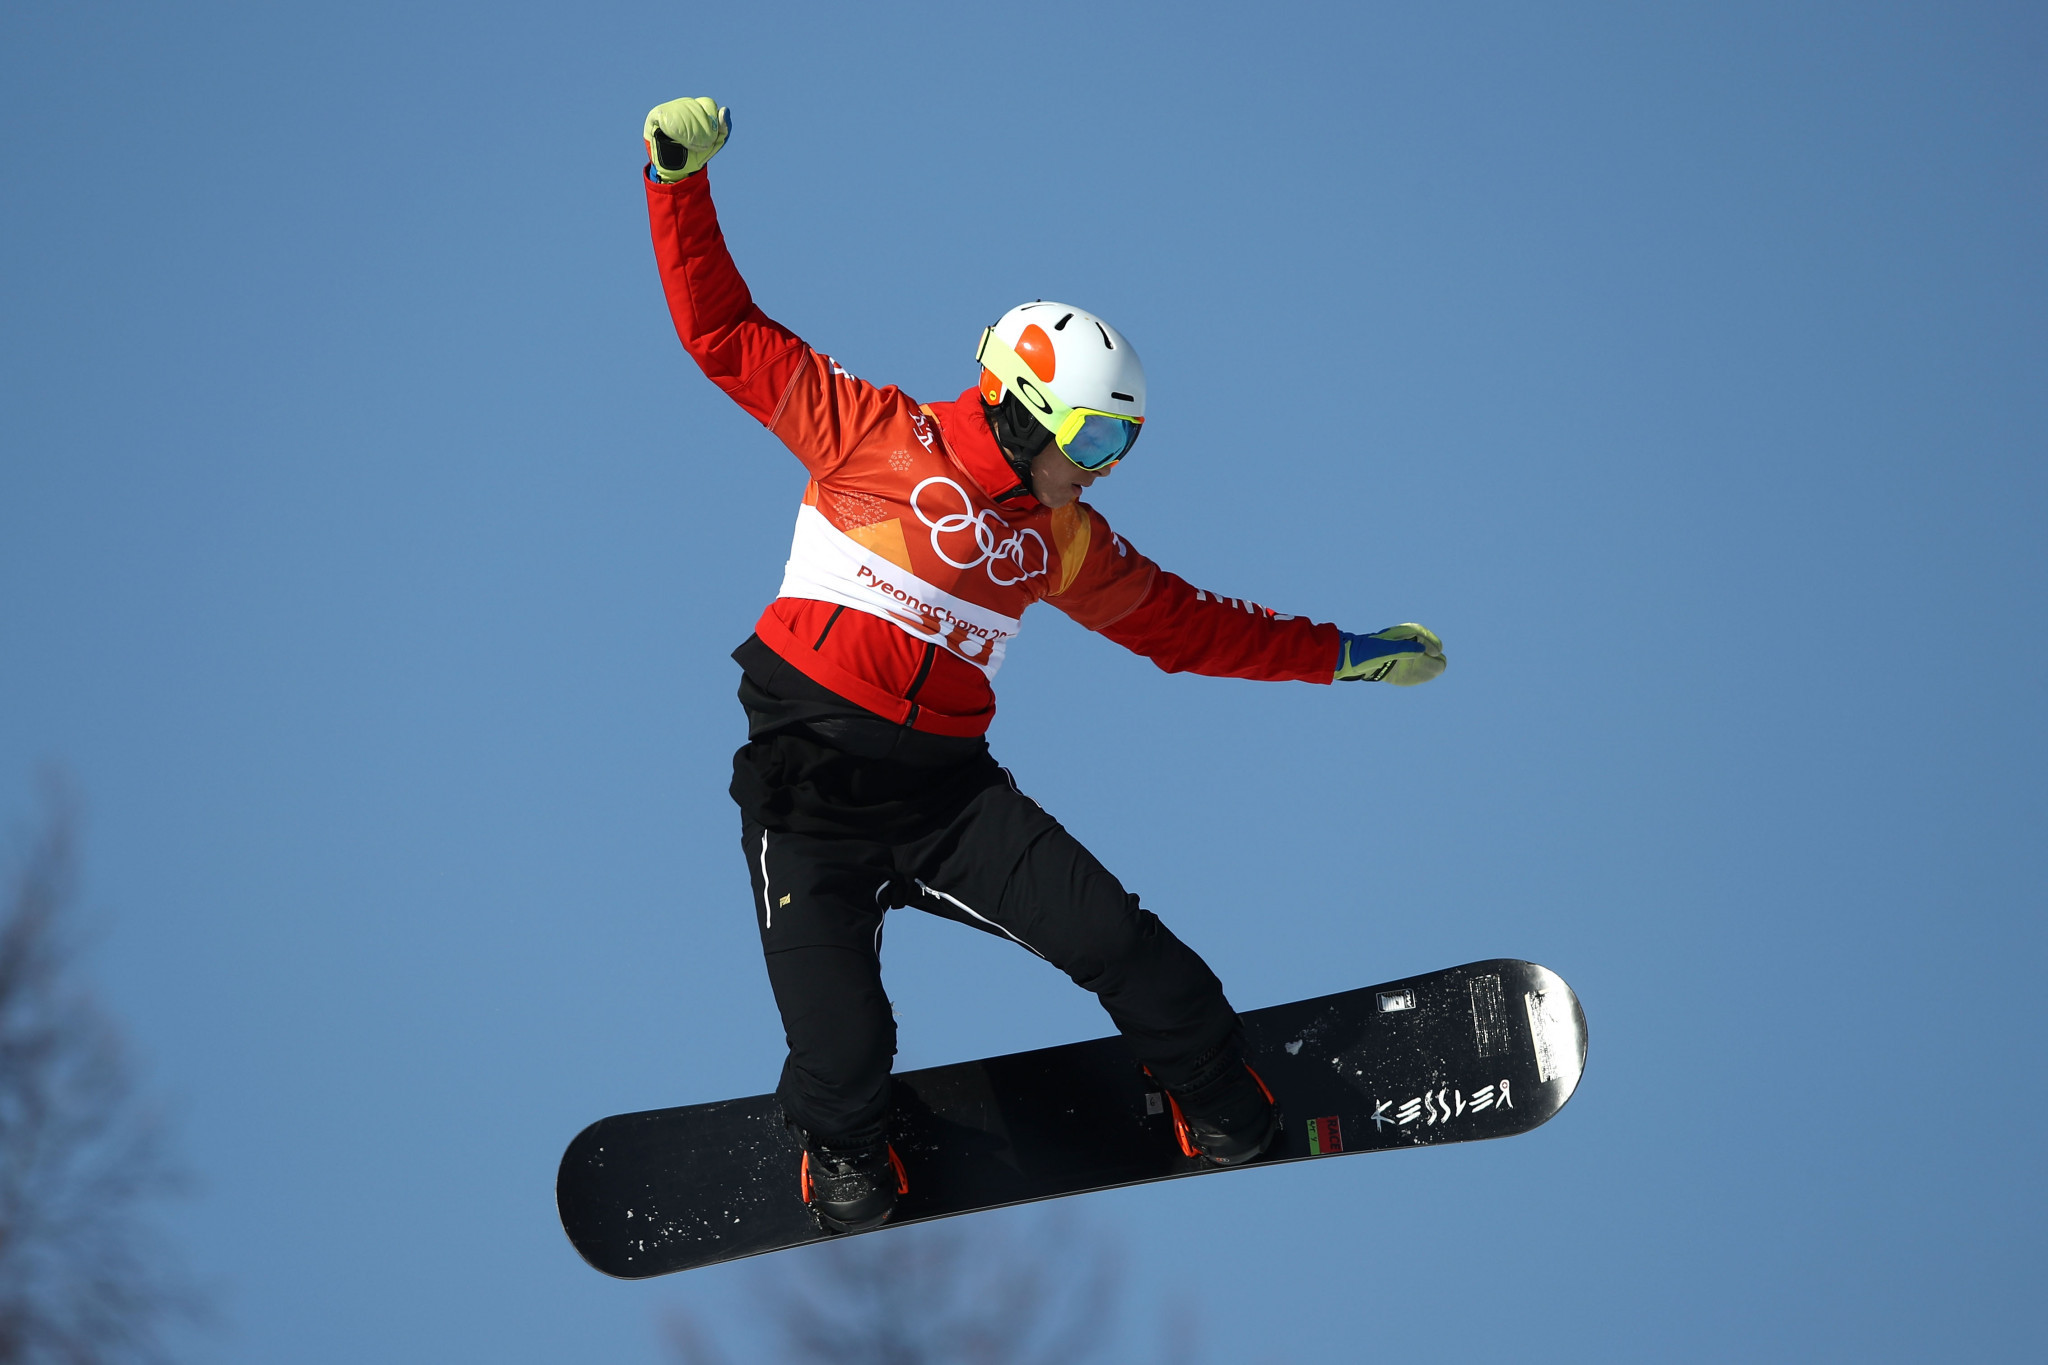 Eliot Grondin of Canada was quickest in men's qualifying at the Snowboard Cross World Cup in Krasnoyarsk ©Getty Images